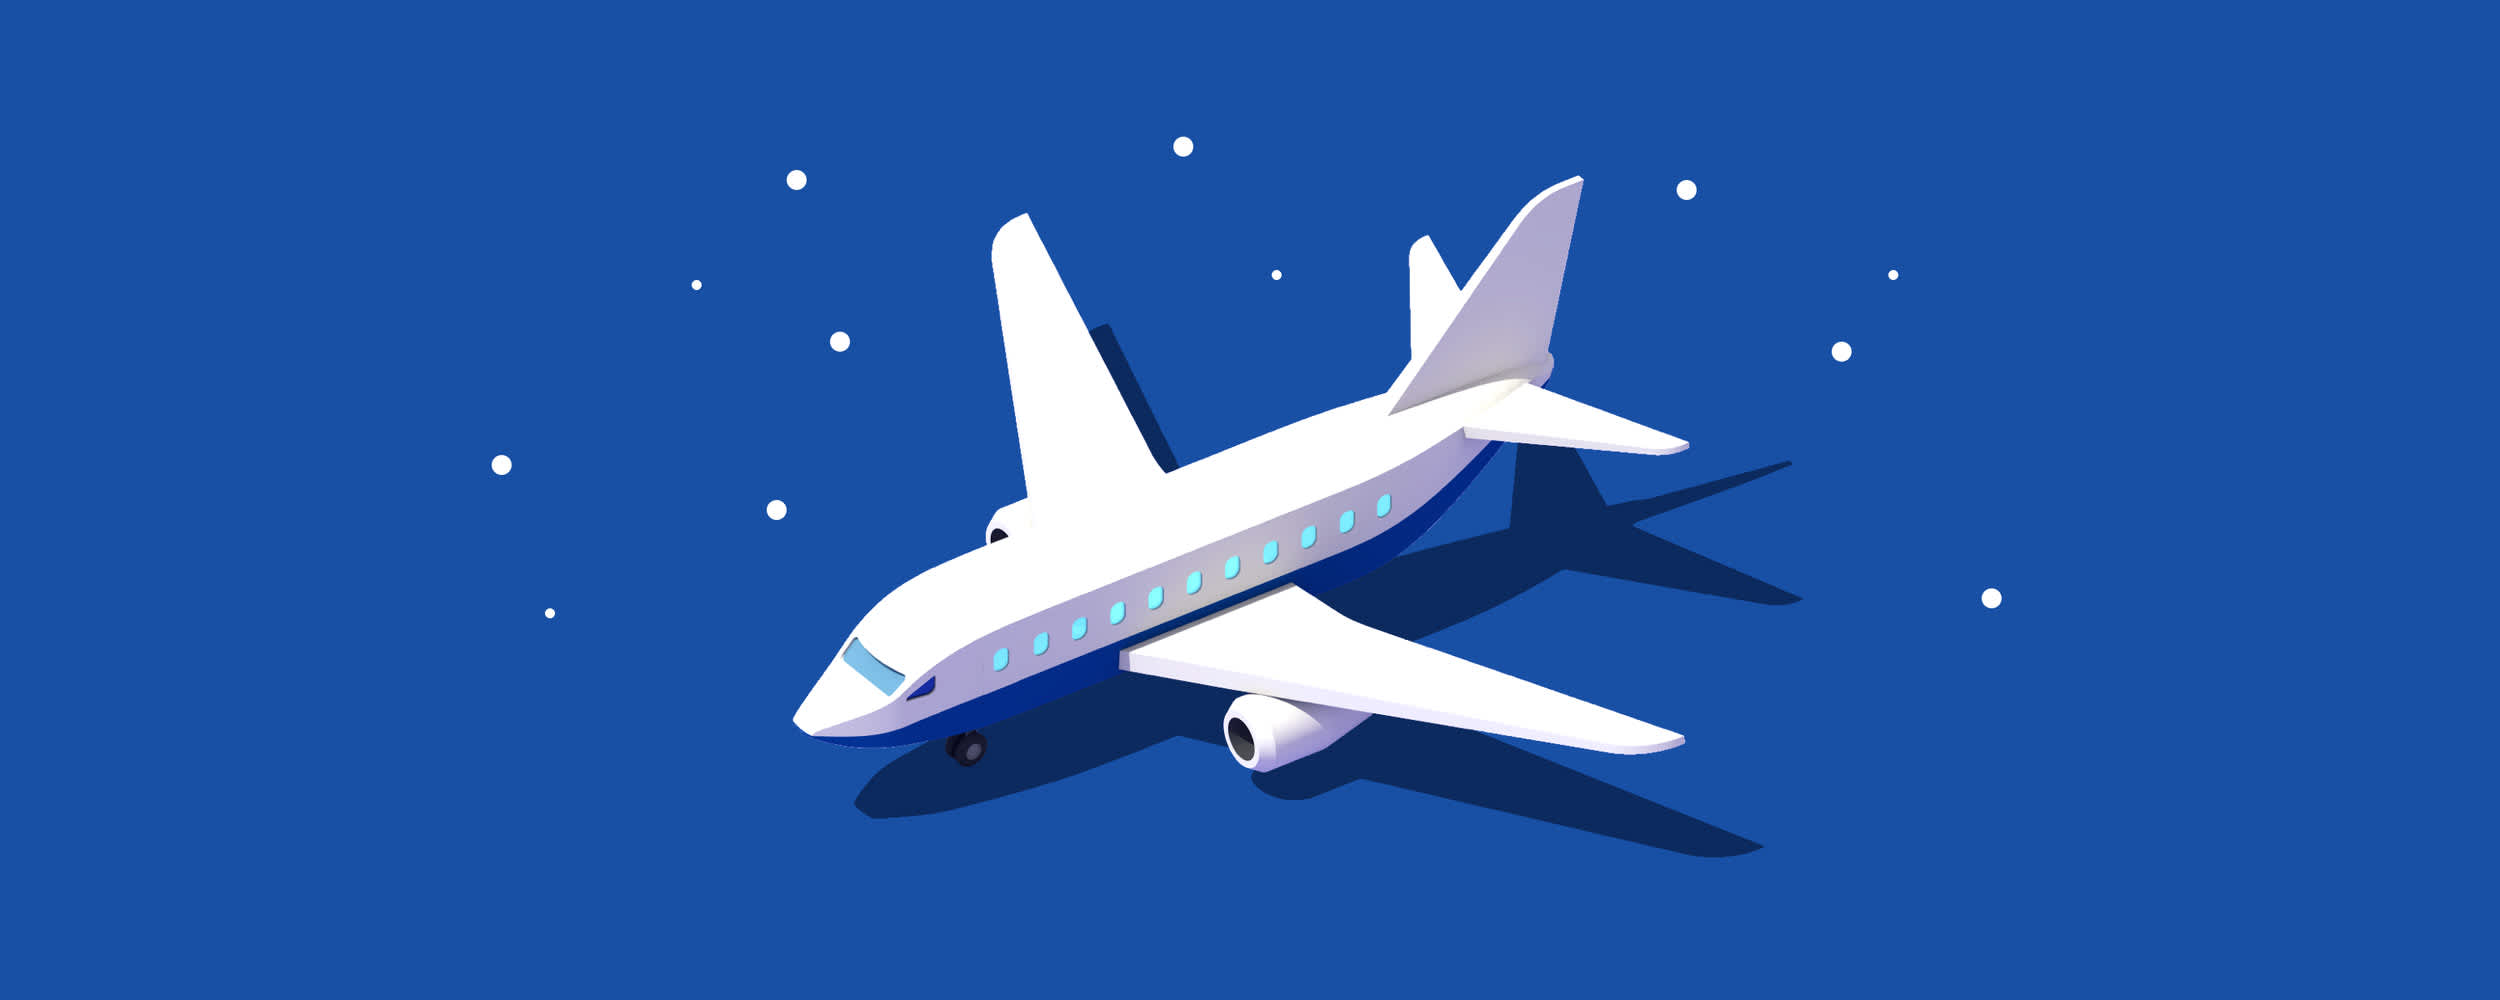 A plane in front of a dark blue background.